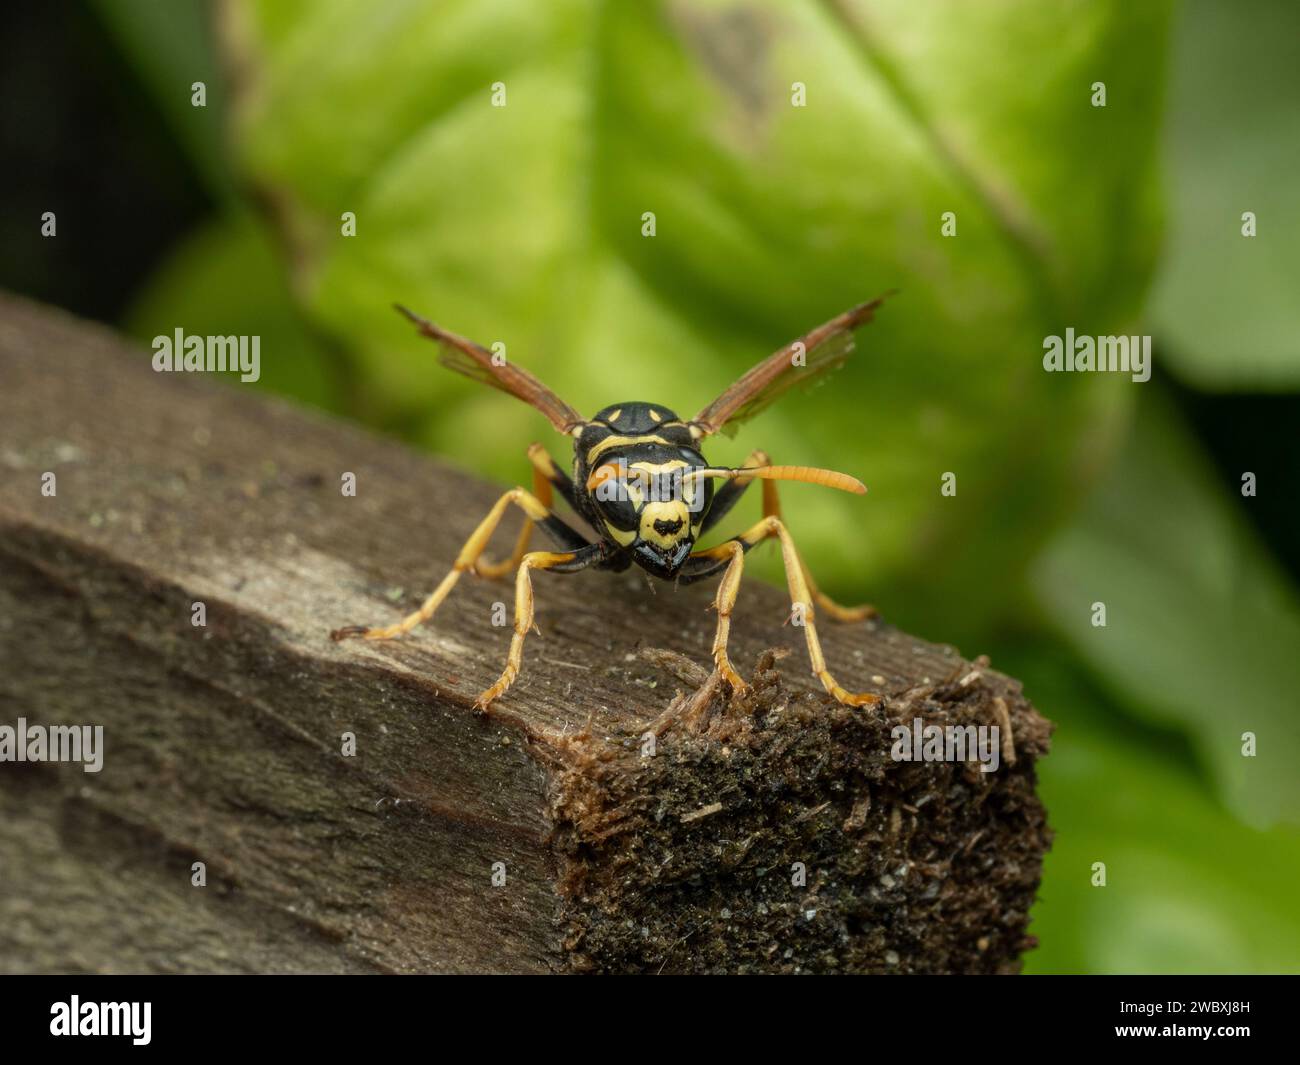 A pretty European paper wasp, Polistes dominula, with tattered wings facing the camera Stock Photo